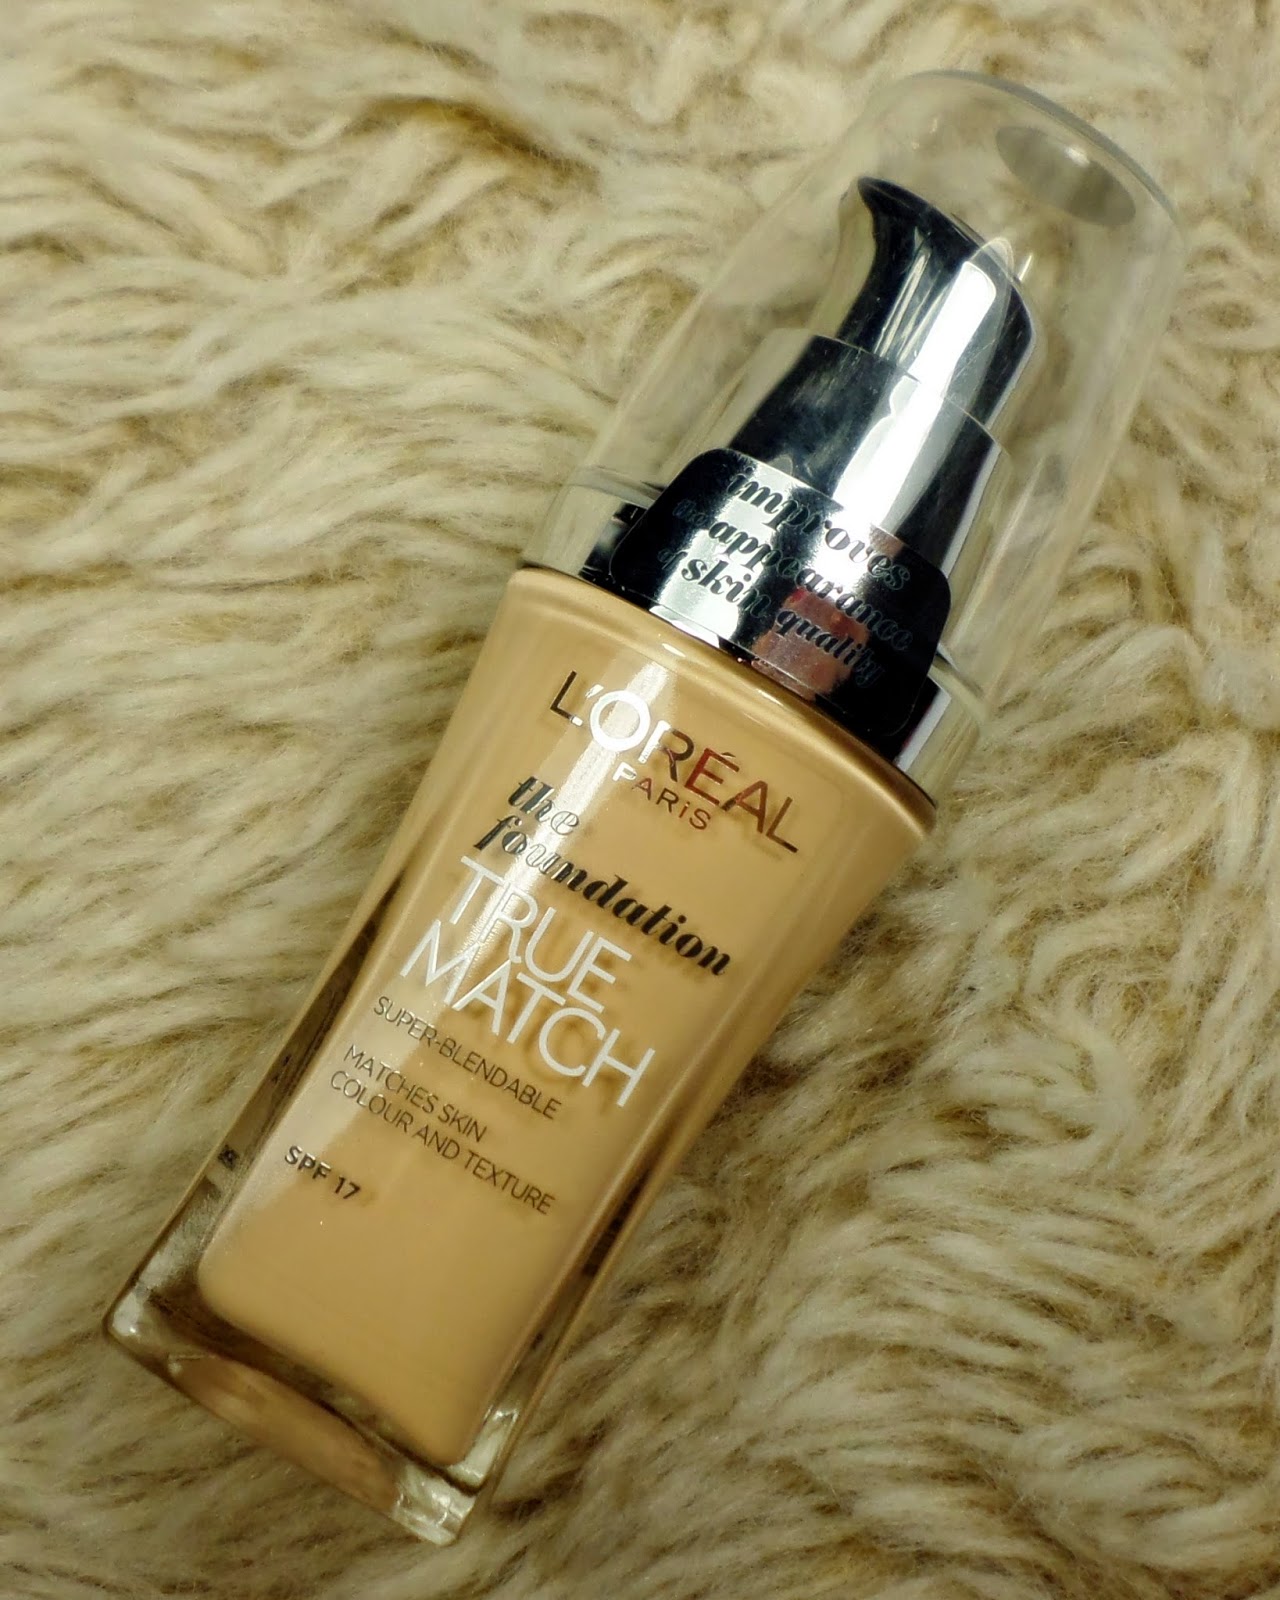 L'Oreal True Match Foundation in N1 Ivory